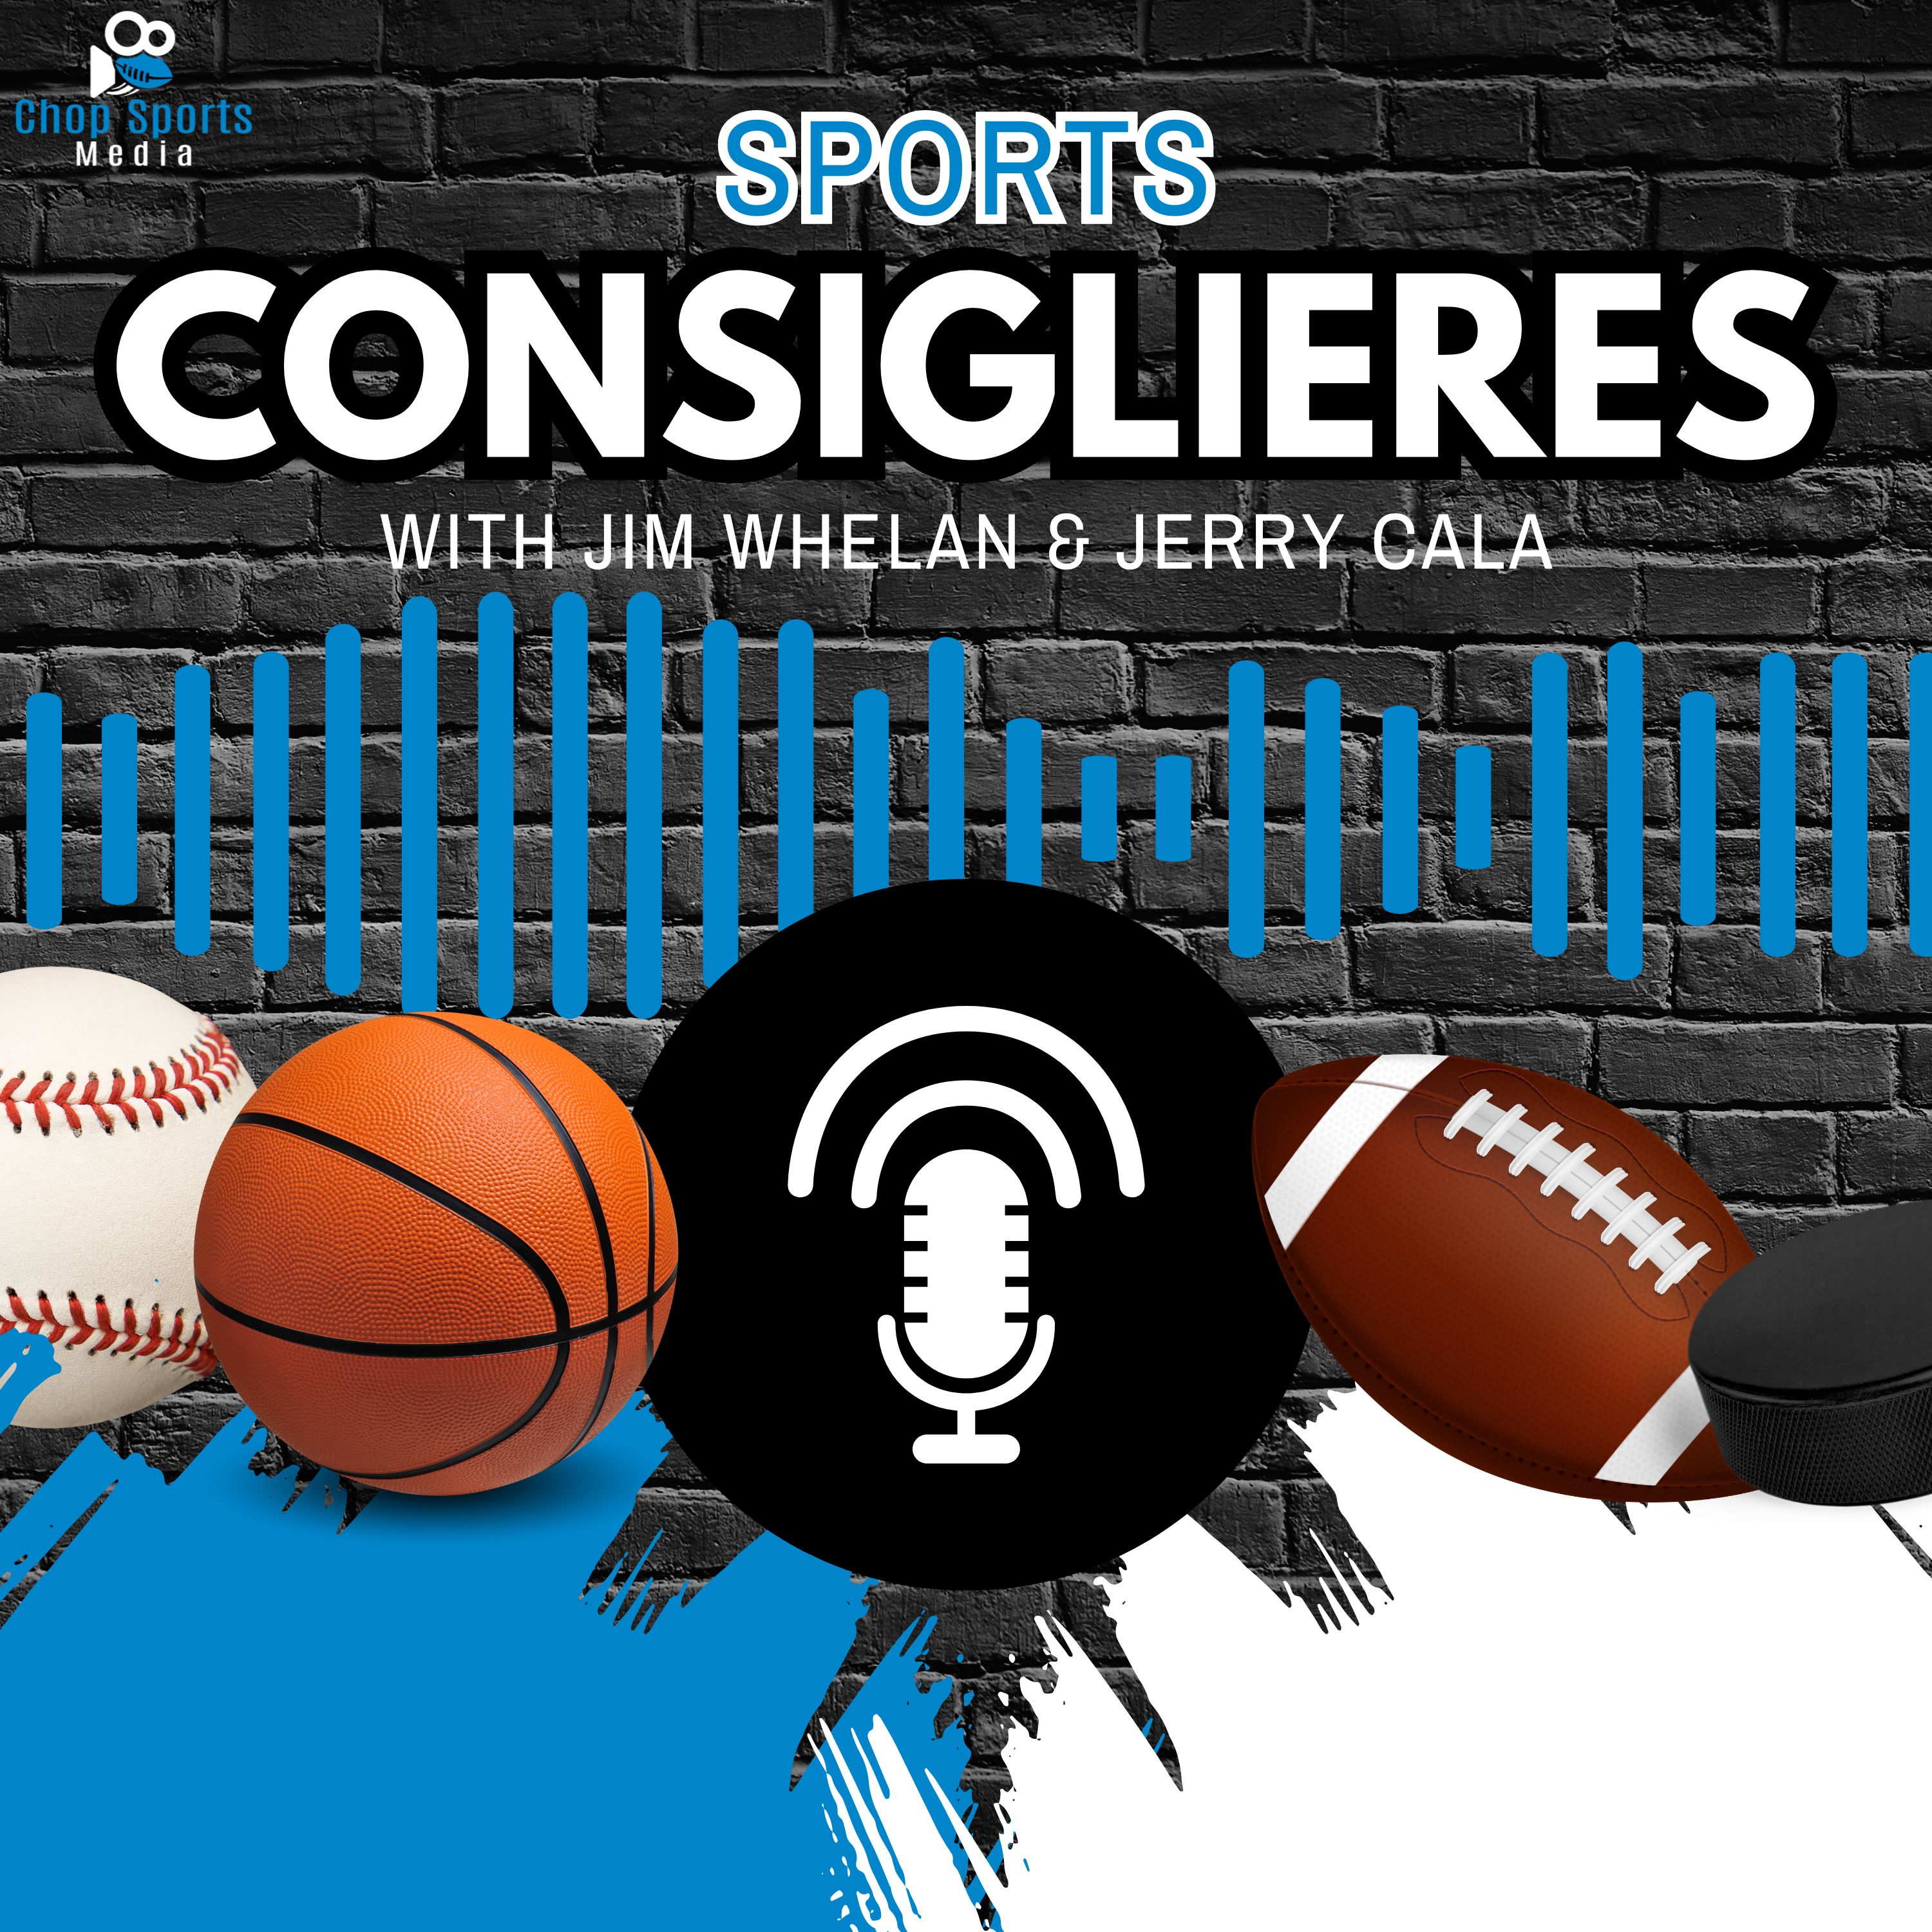 Artwork for Sports Consiglieres